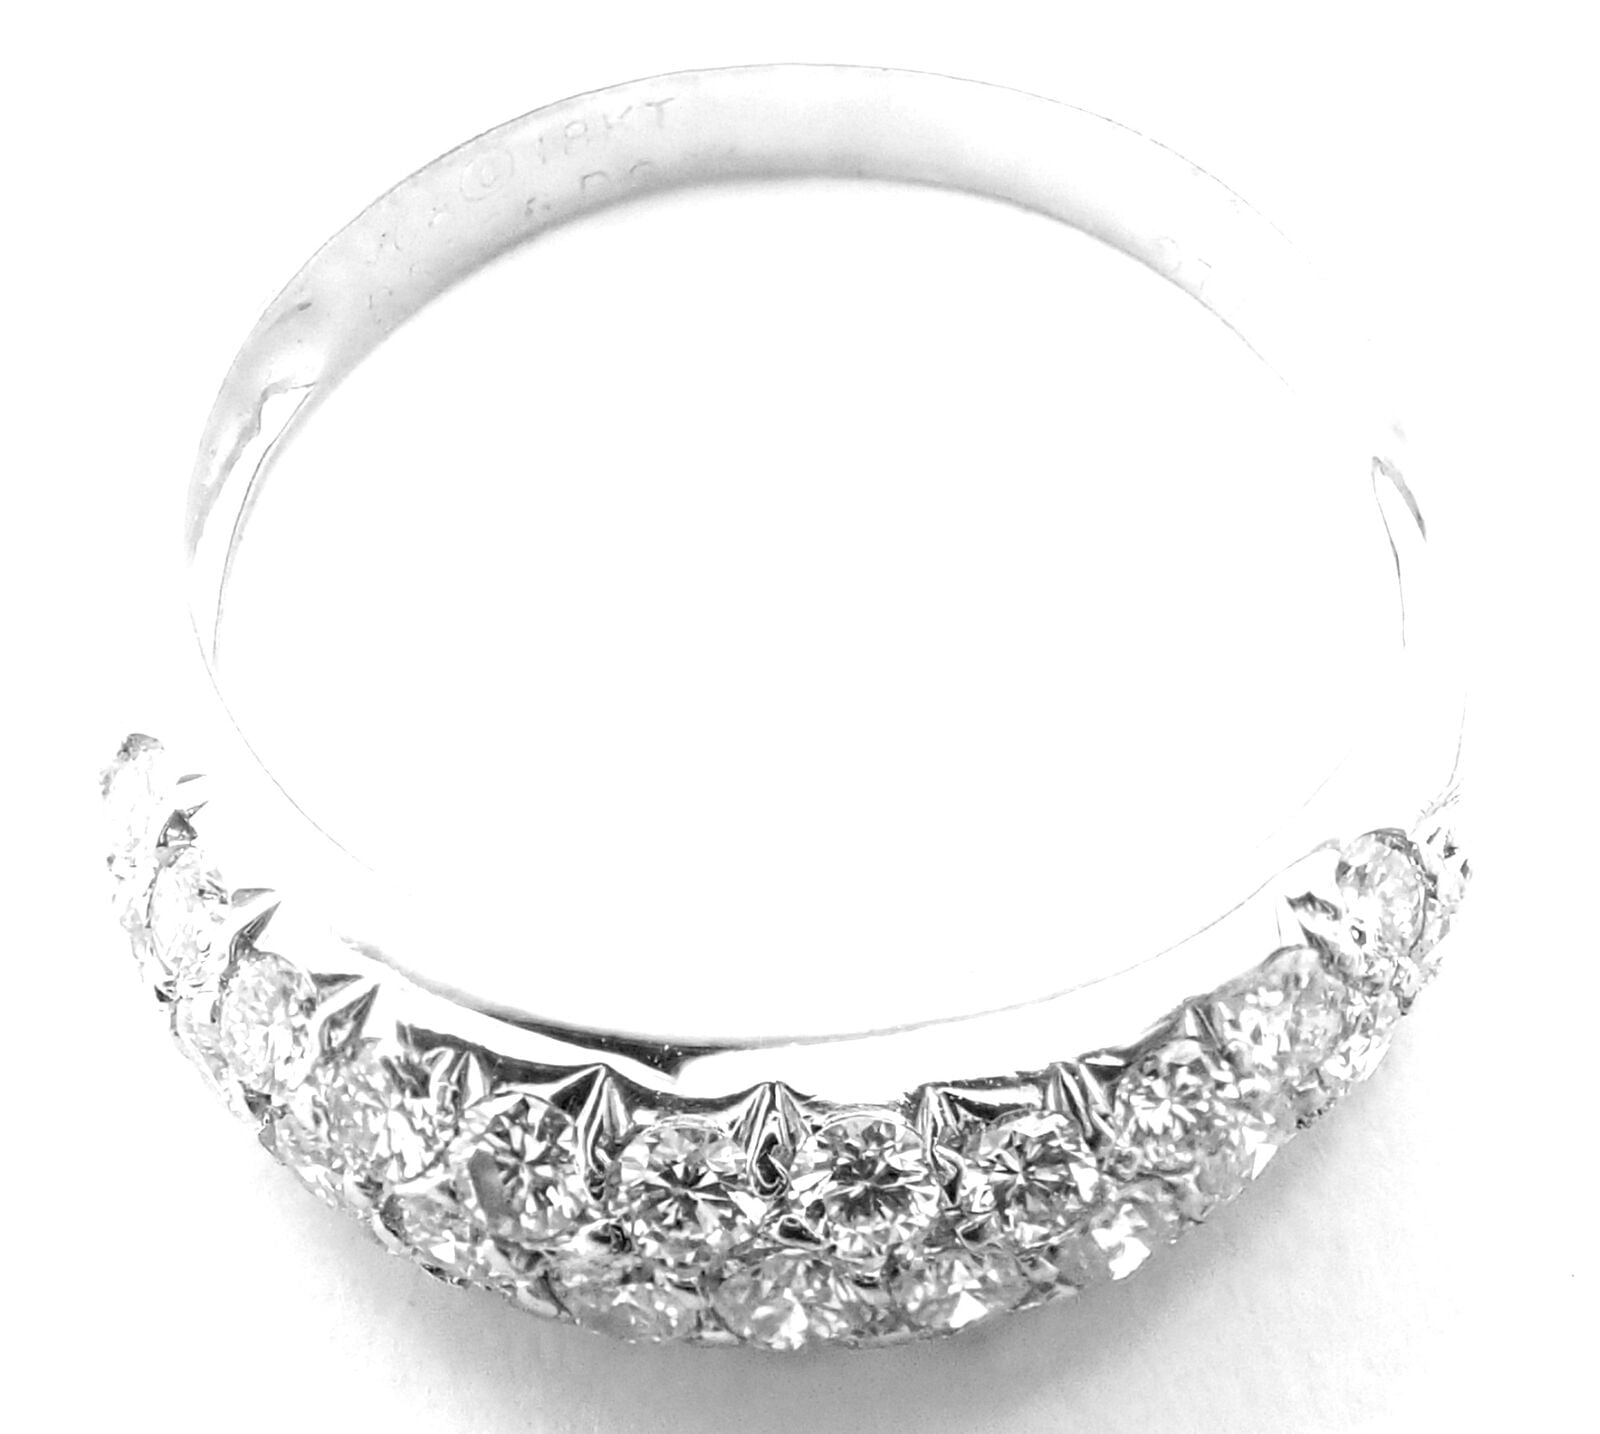 Van Cleef & Arpels Jewelry & Watches:Fine Jewelry:Rings Rare! Authentic Van Cleef & Arpels 18k White Gold Diamond Band Ring